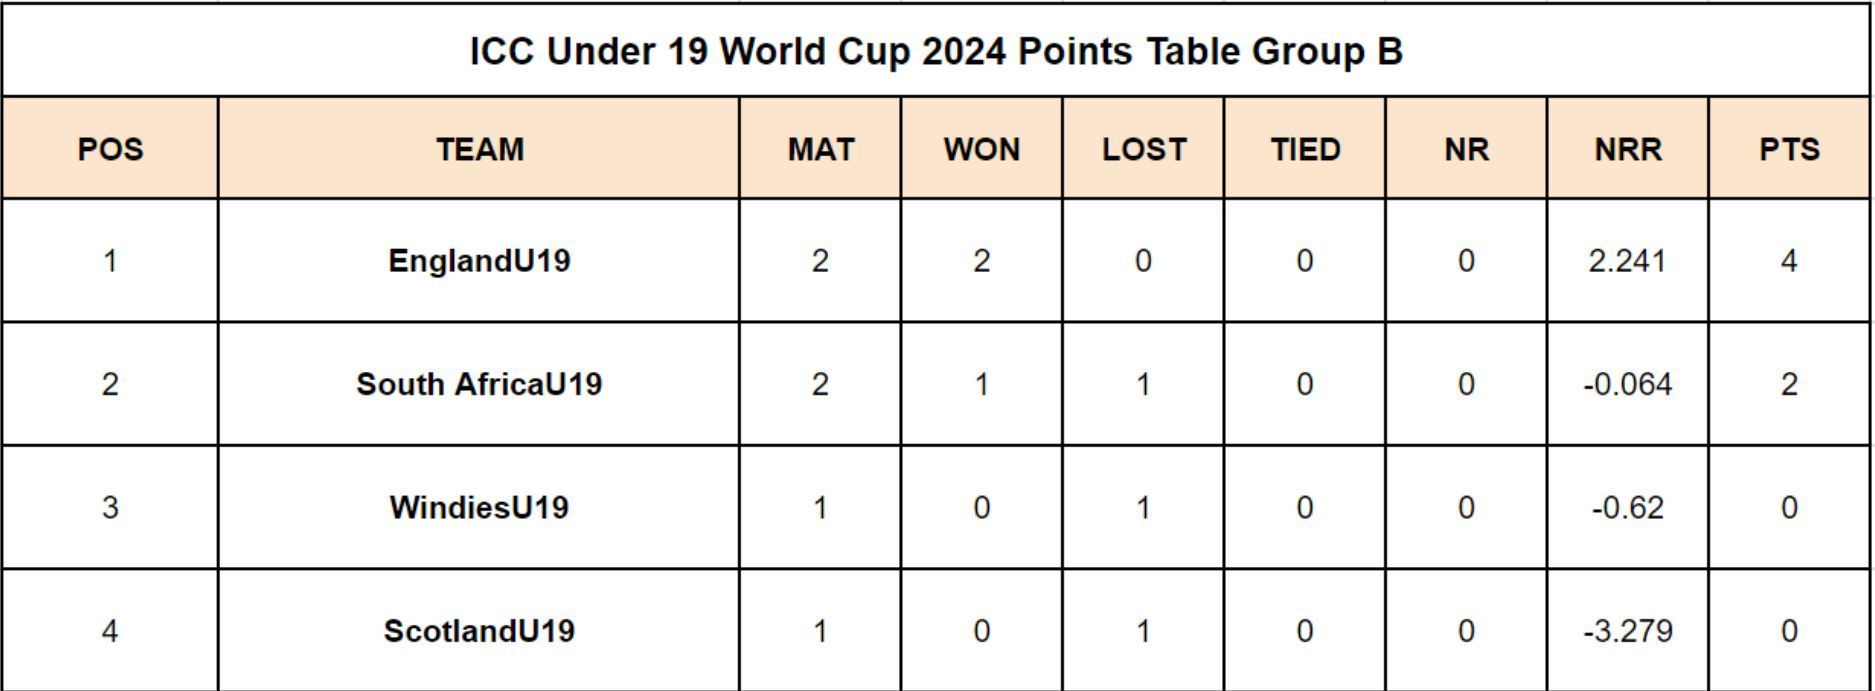 Under 19 World Cup 2024 Points table